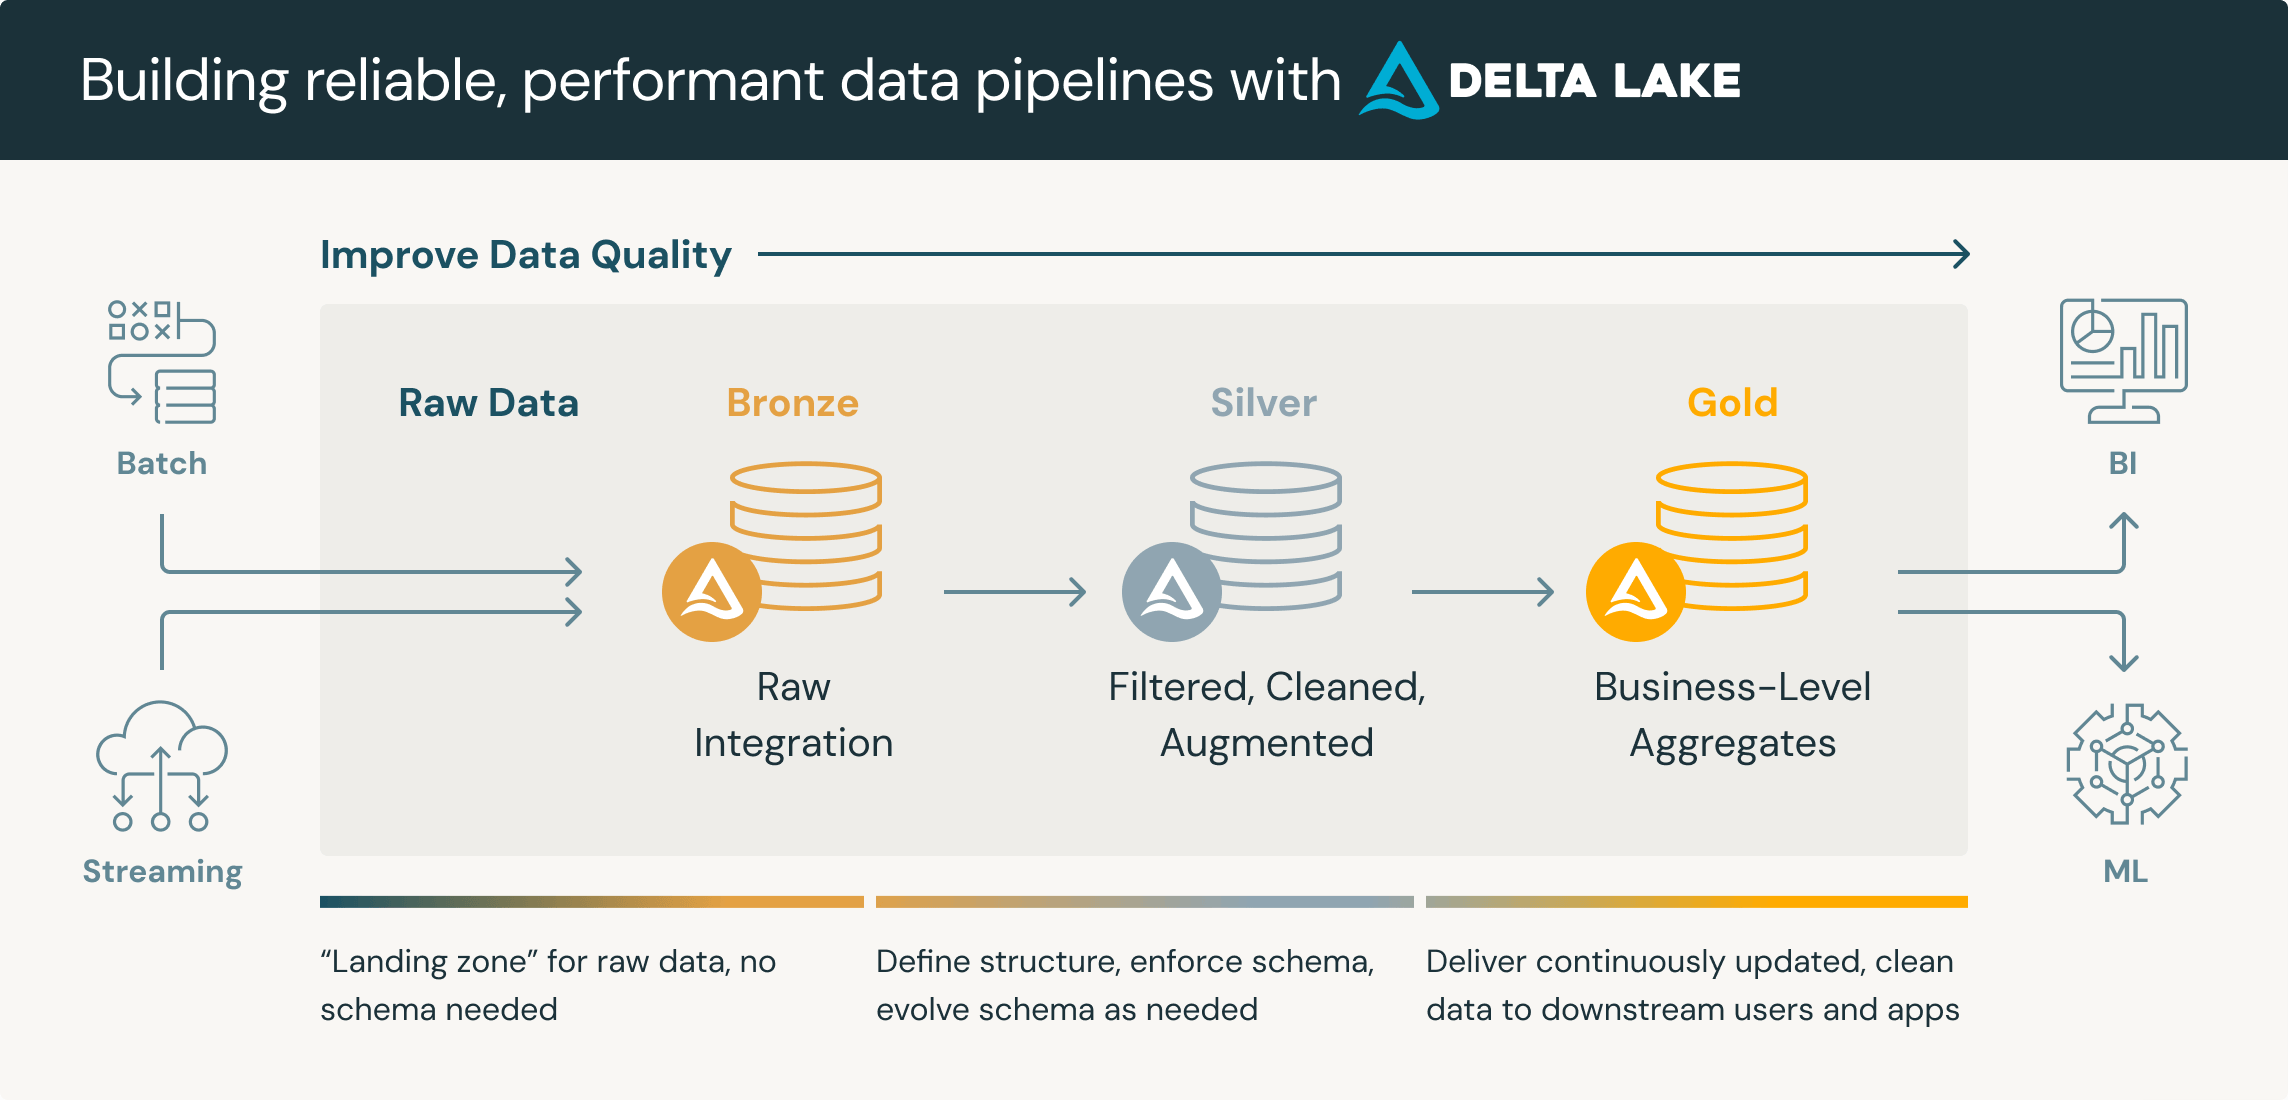 Building Reliable, Performant Data Pipelines with Delta Lake